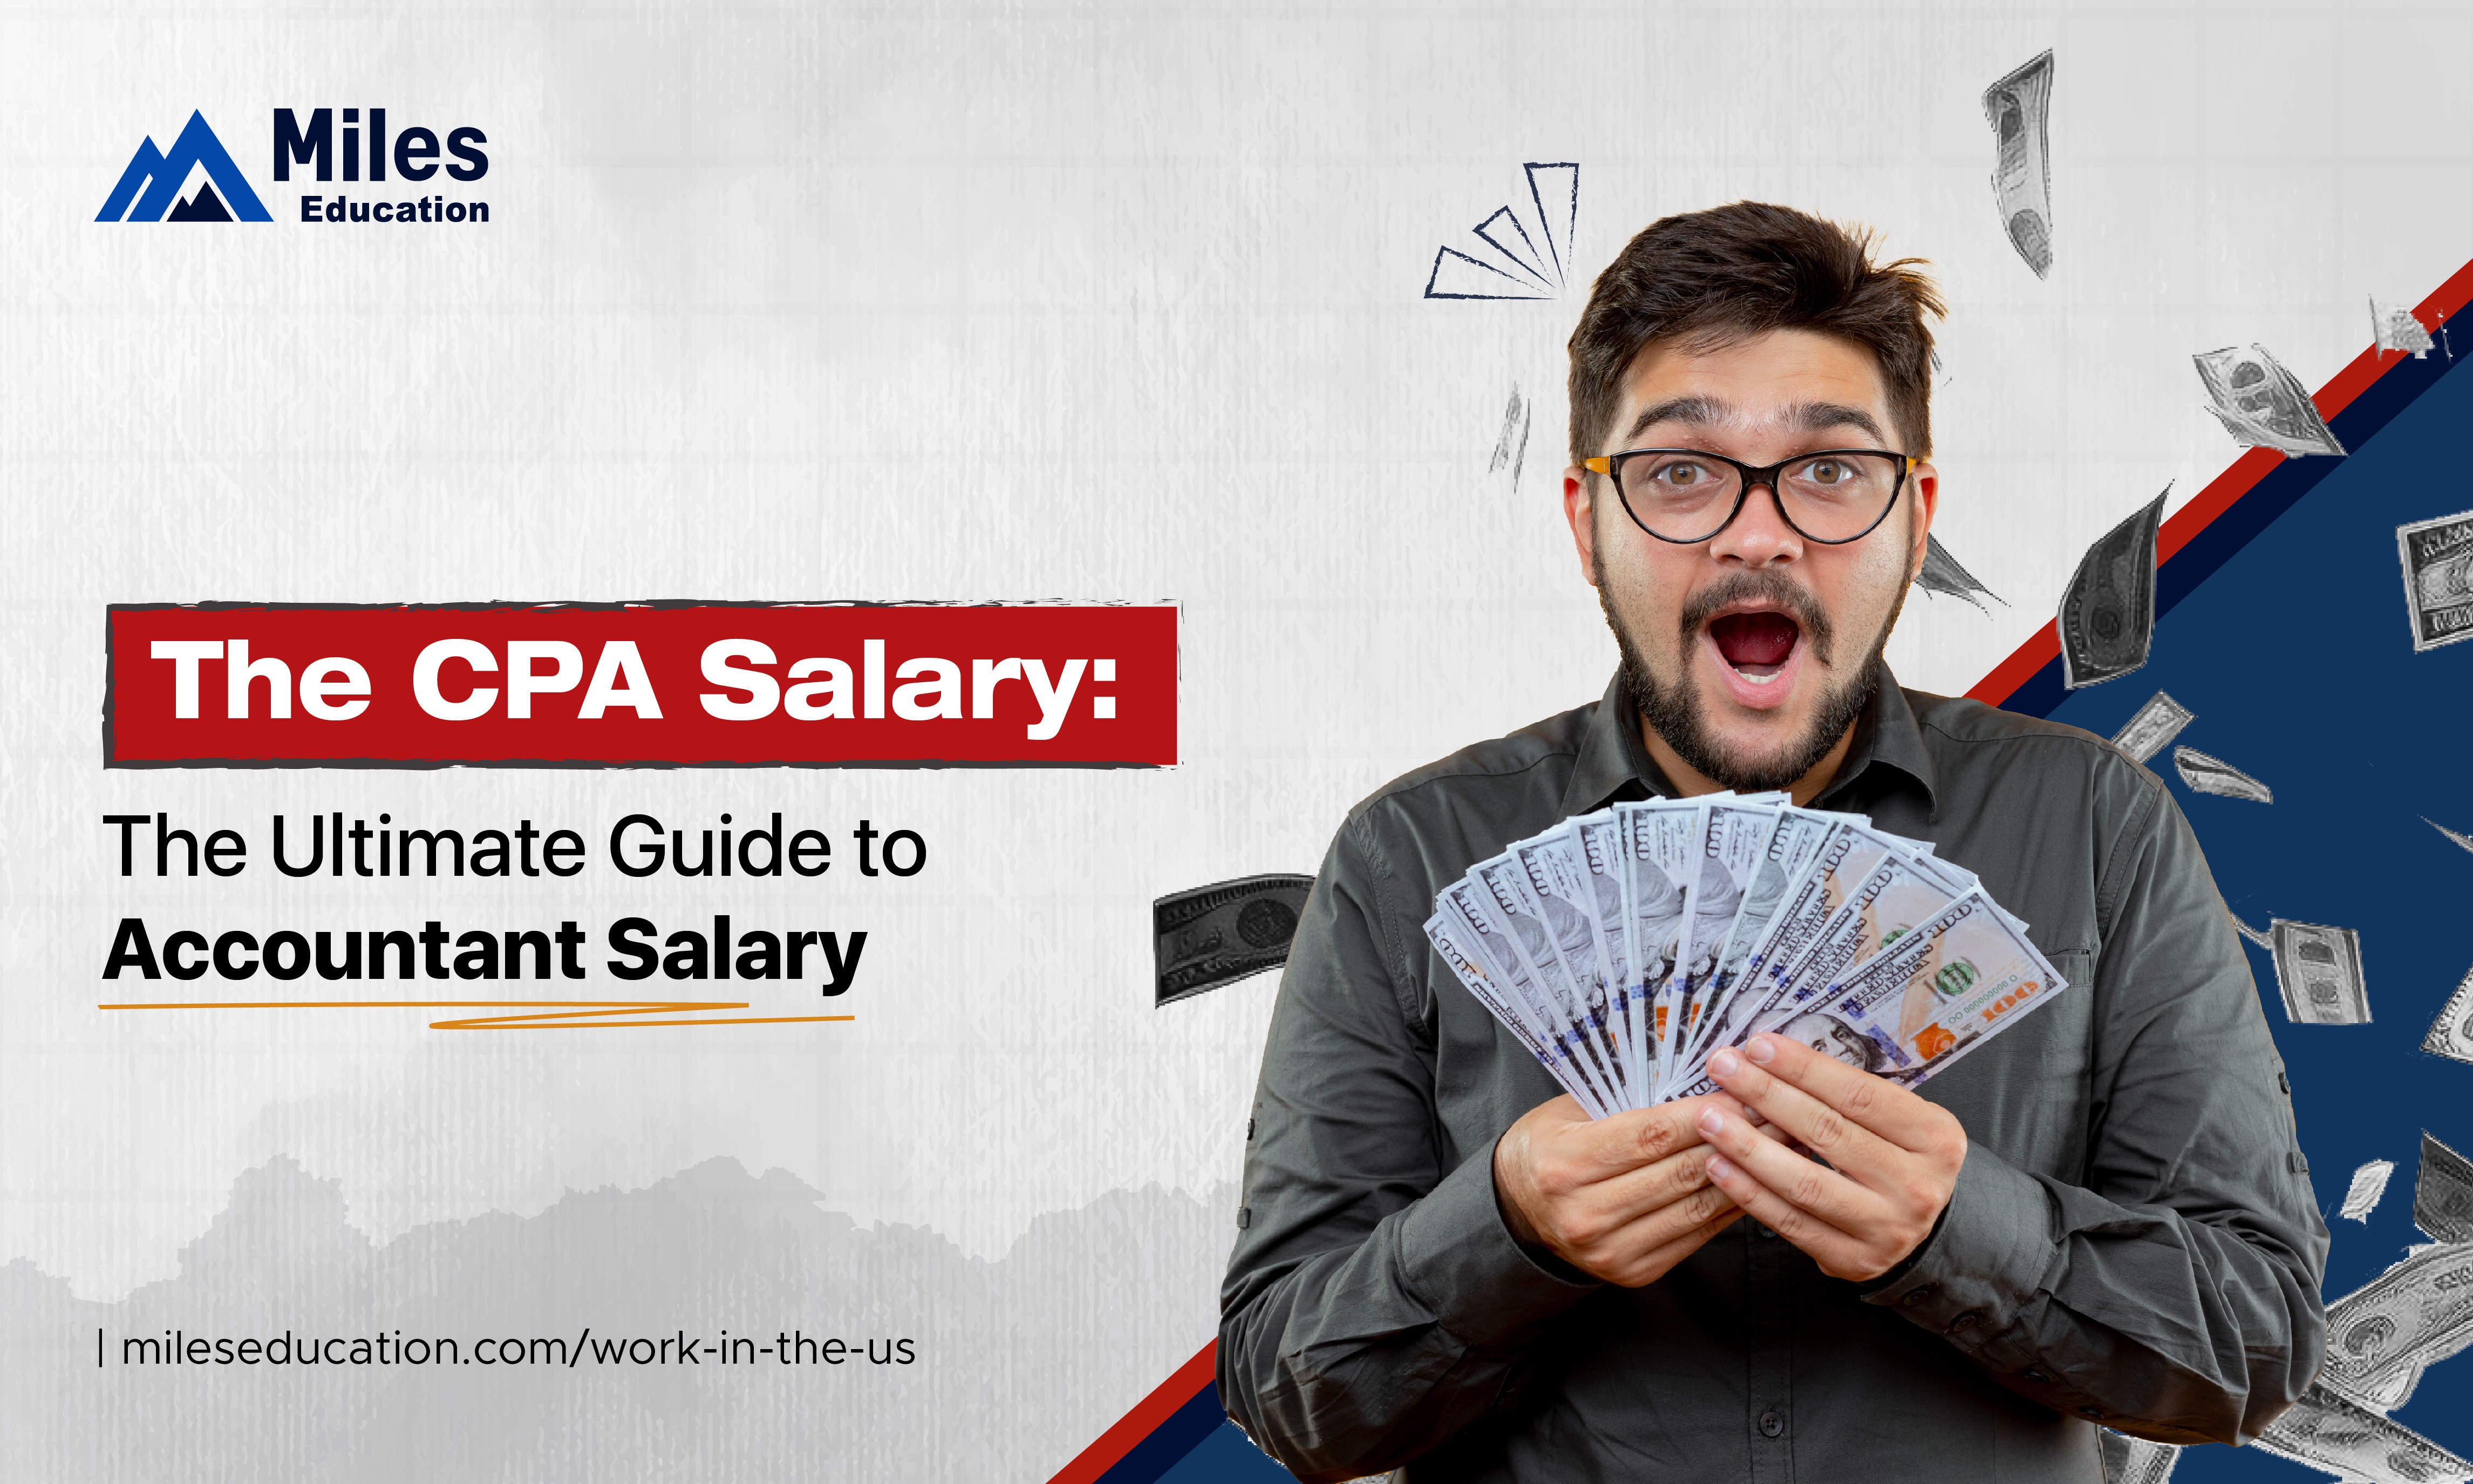 The CPA Salary: The Ultimate Guide to Accountant Salary